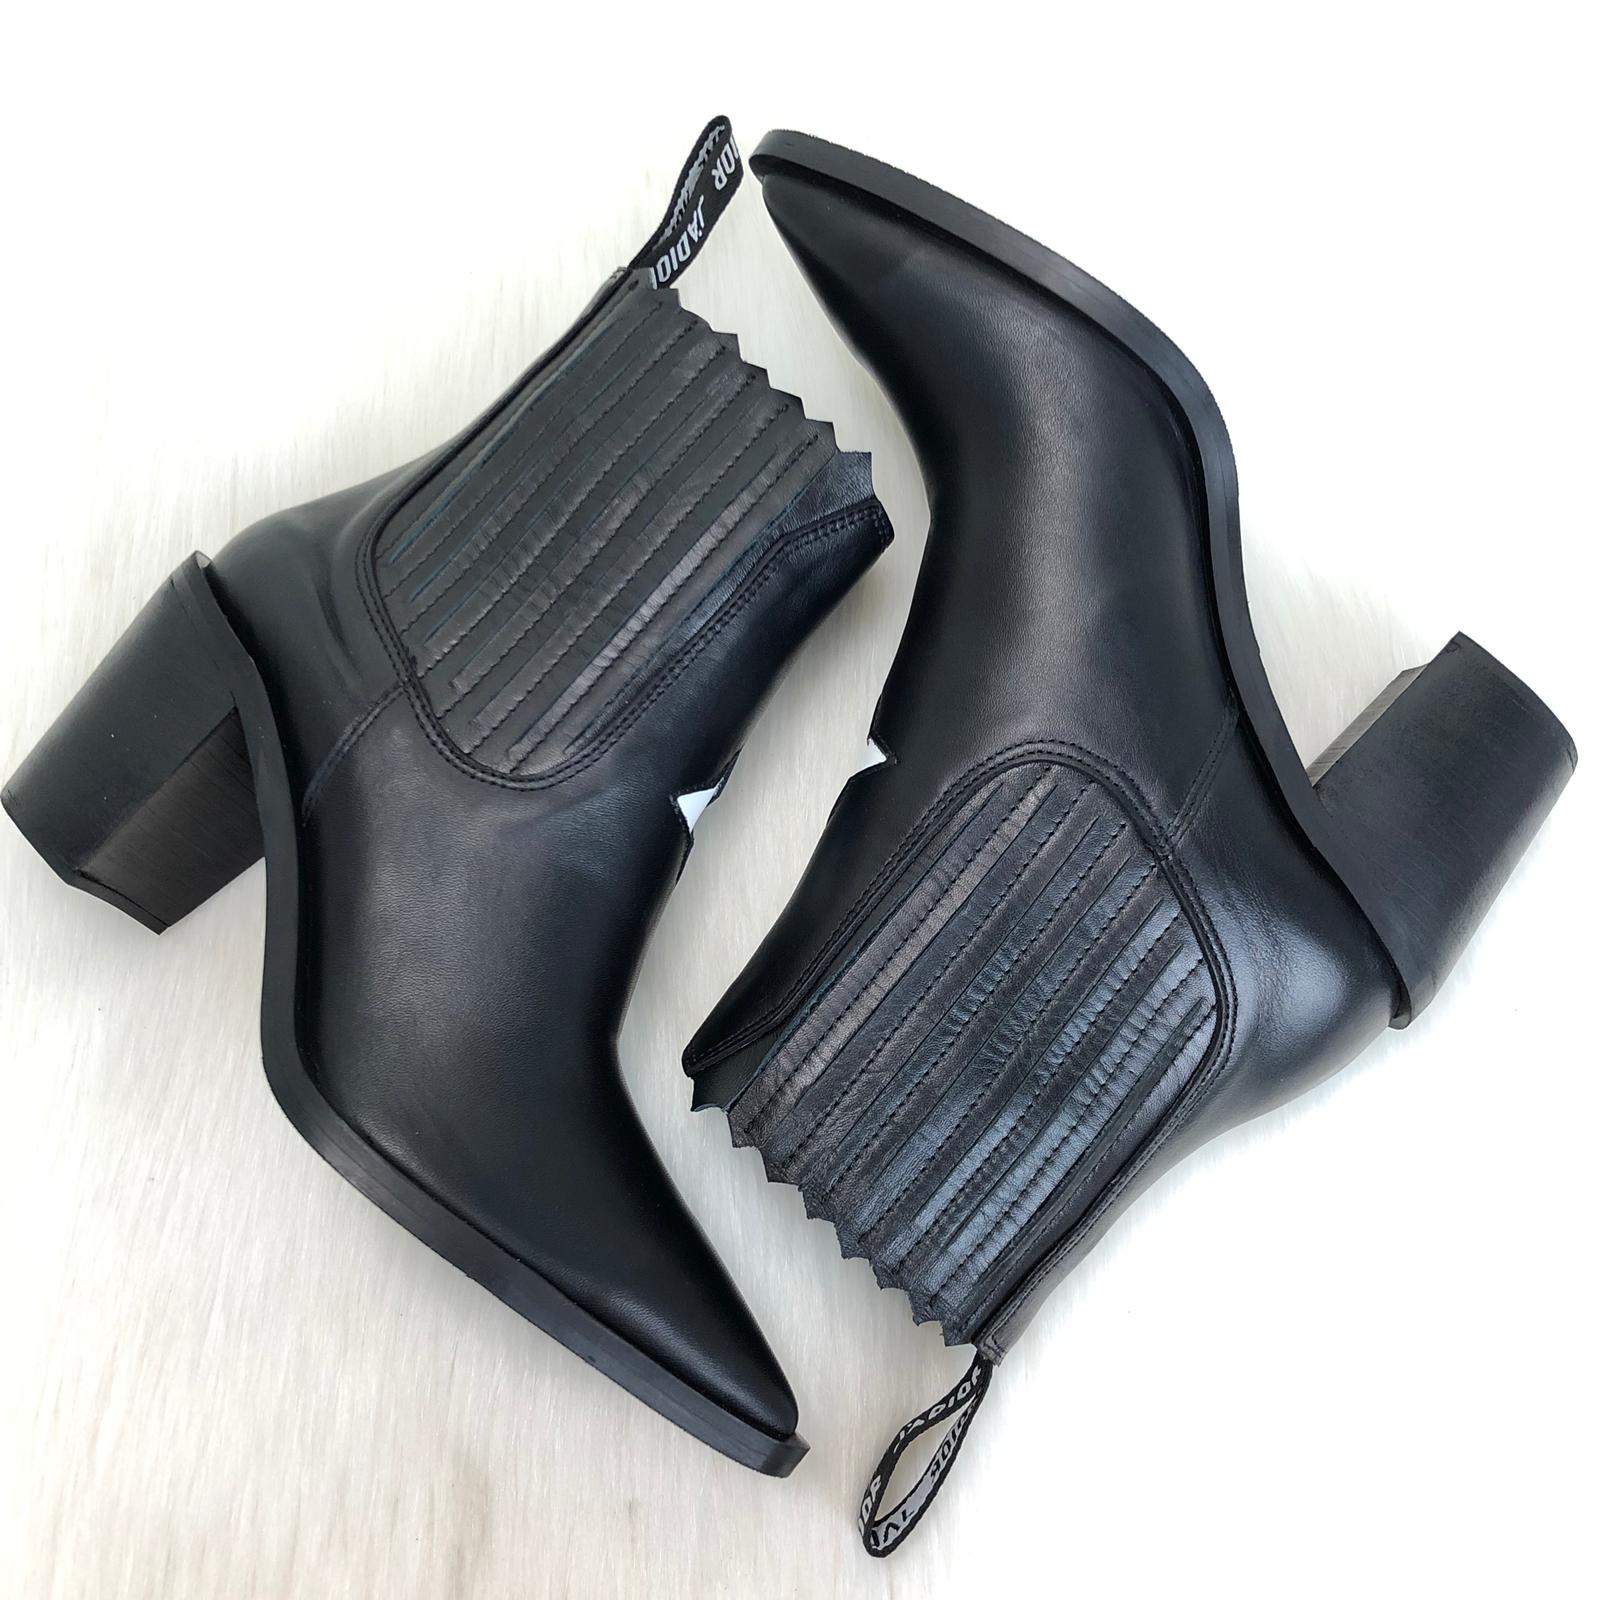 dior star ankle boots